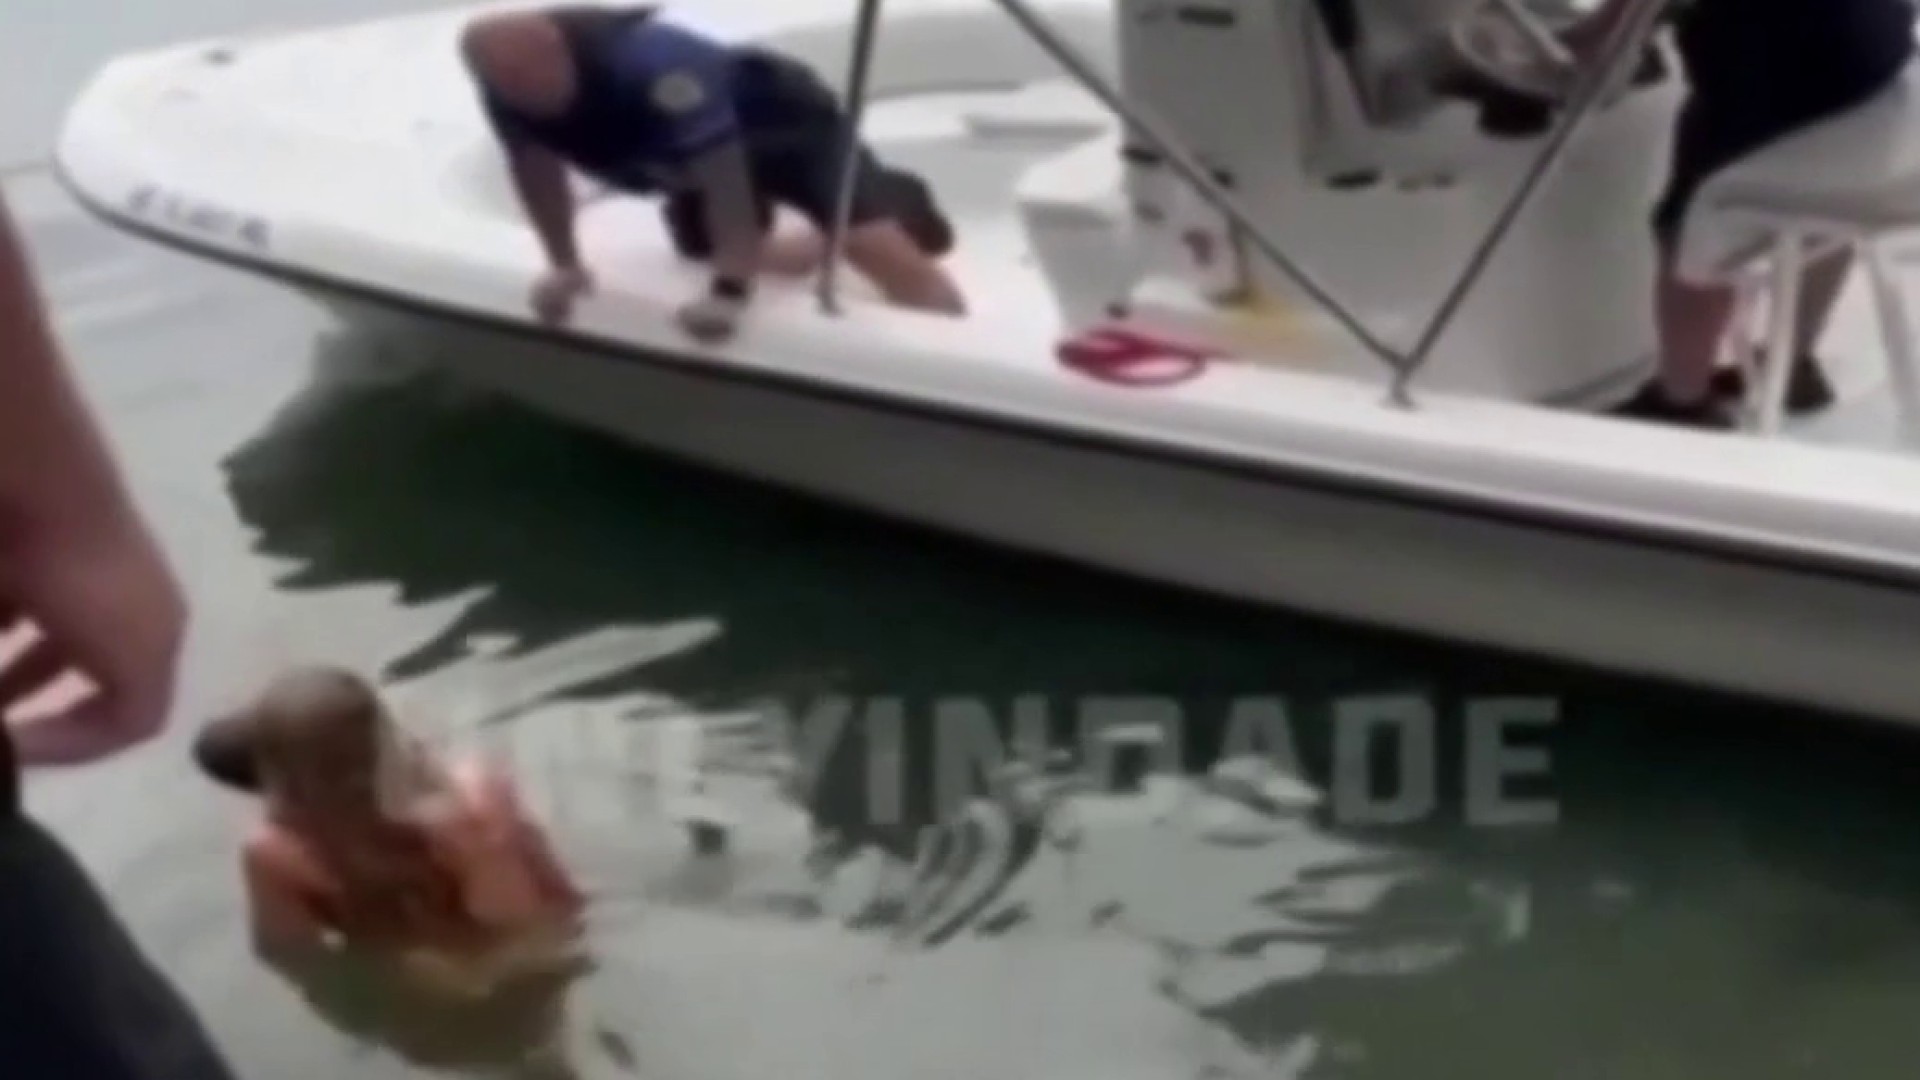 VIDEO Woman strips nude, jumps in water holding nephew, 3, to avoid arrest, Miami police